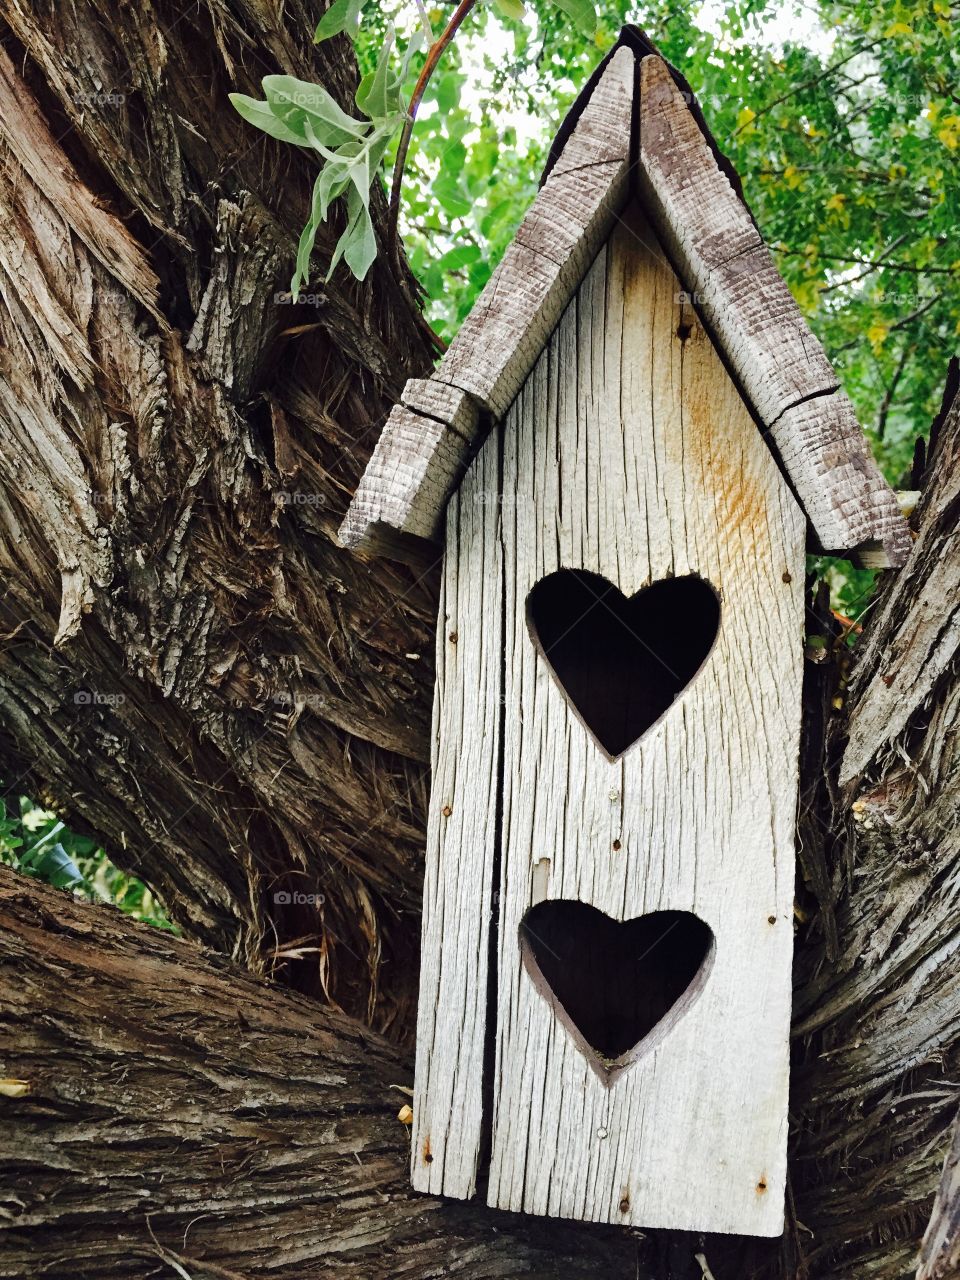 Wooden Birdhouse. A cute wooden birdhouse with heart shaped entry holes